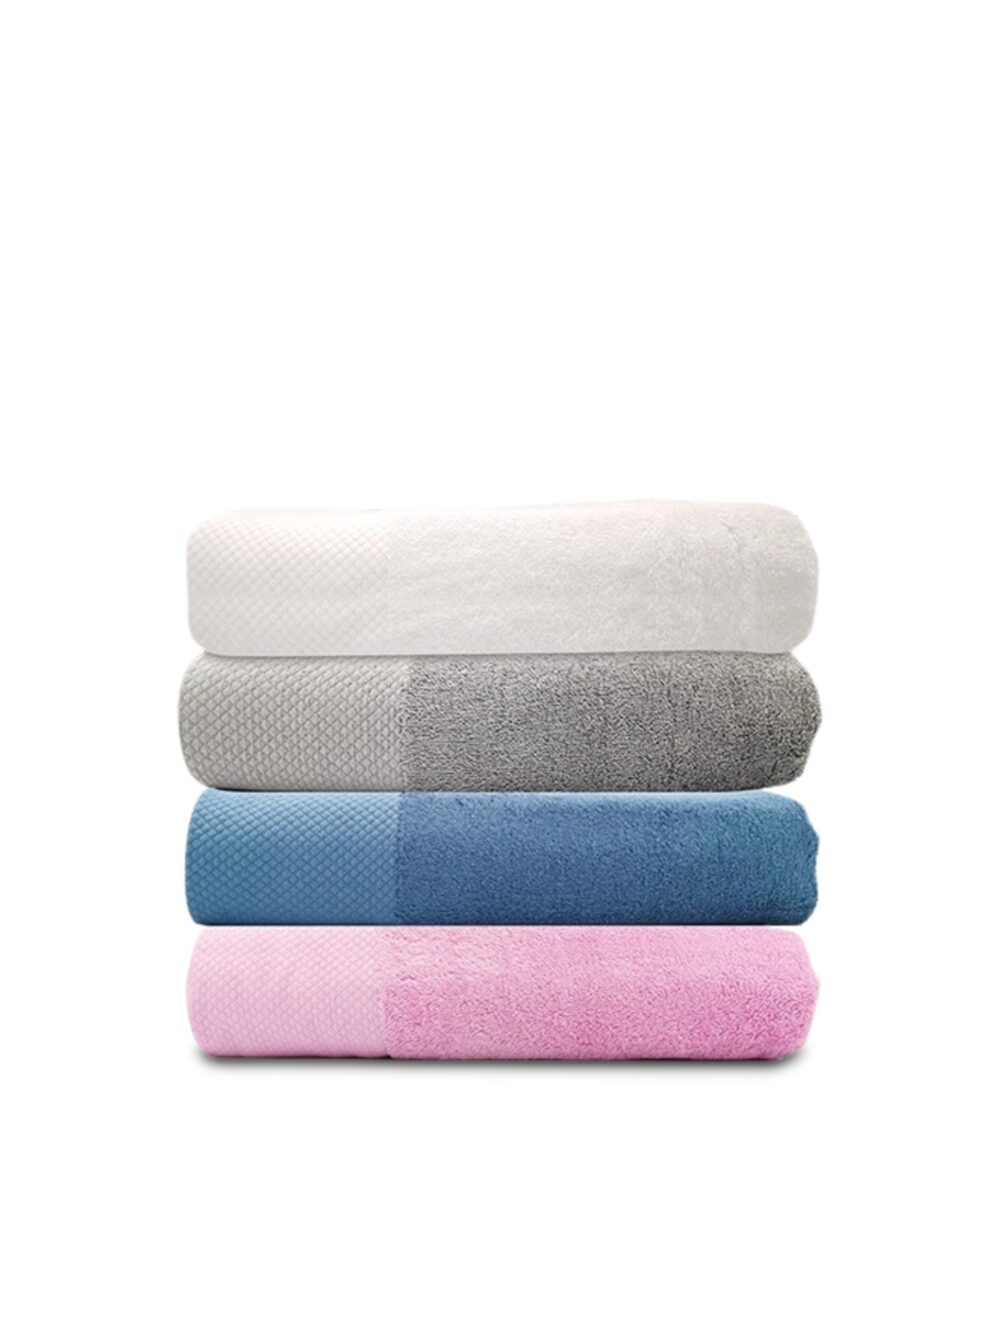 600gsm pure Egyptian cotton towels